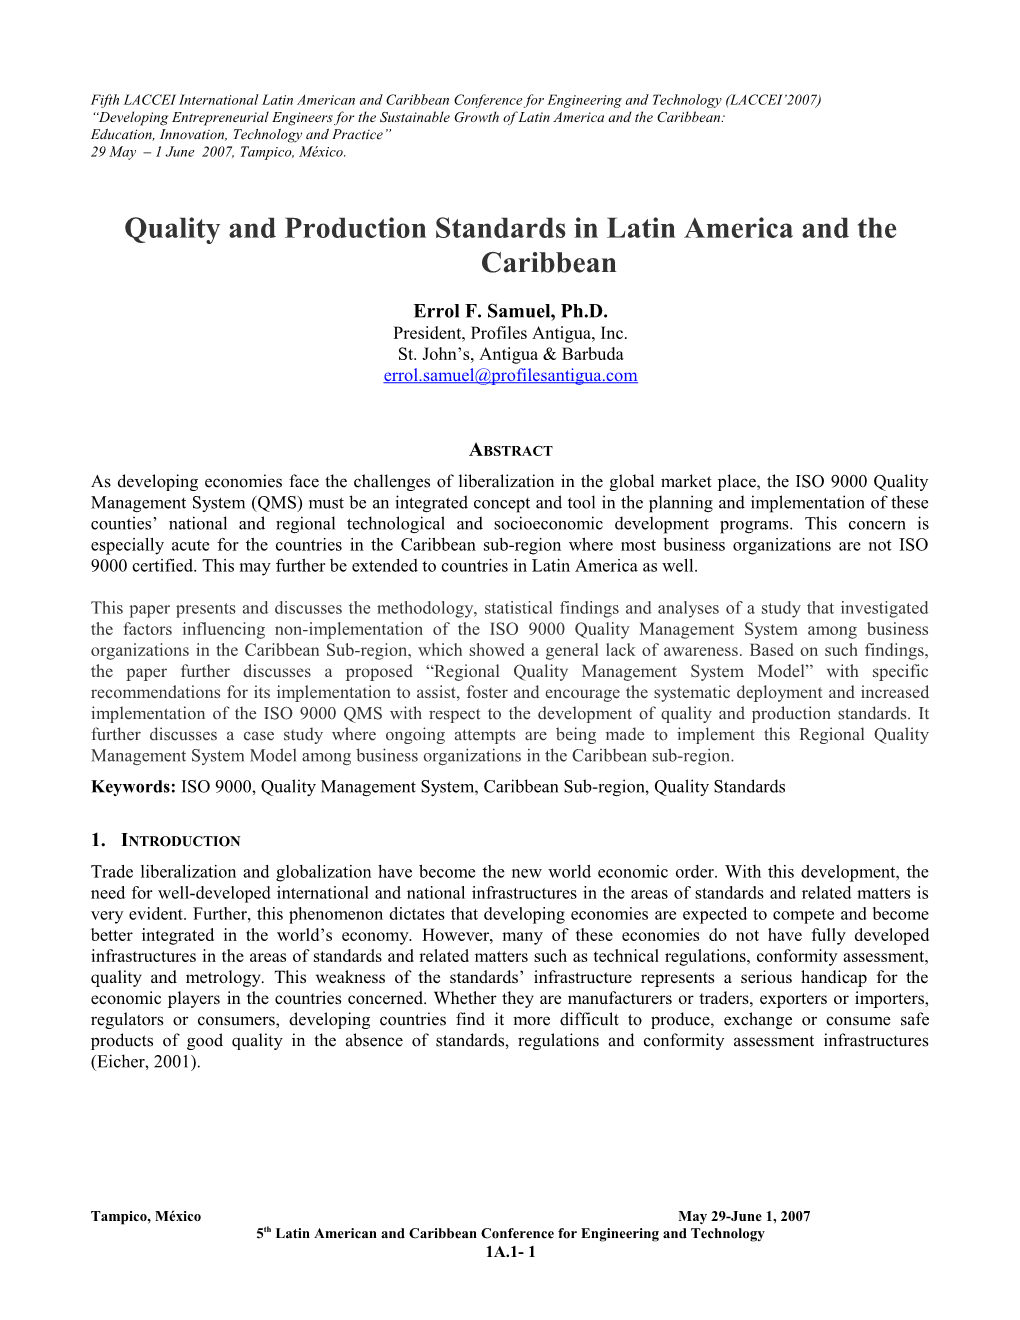 Quality and Production Standards in Latin America and the Caribbean